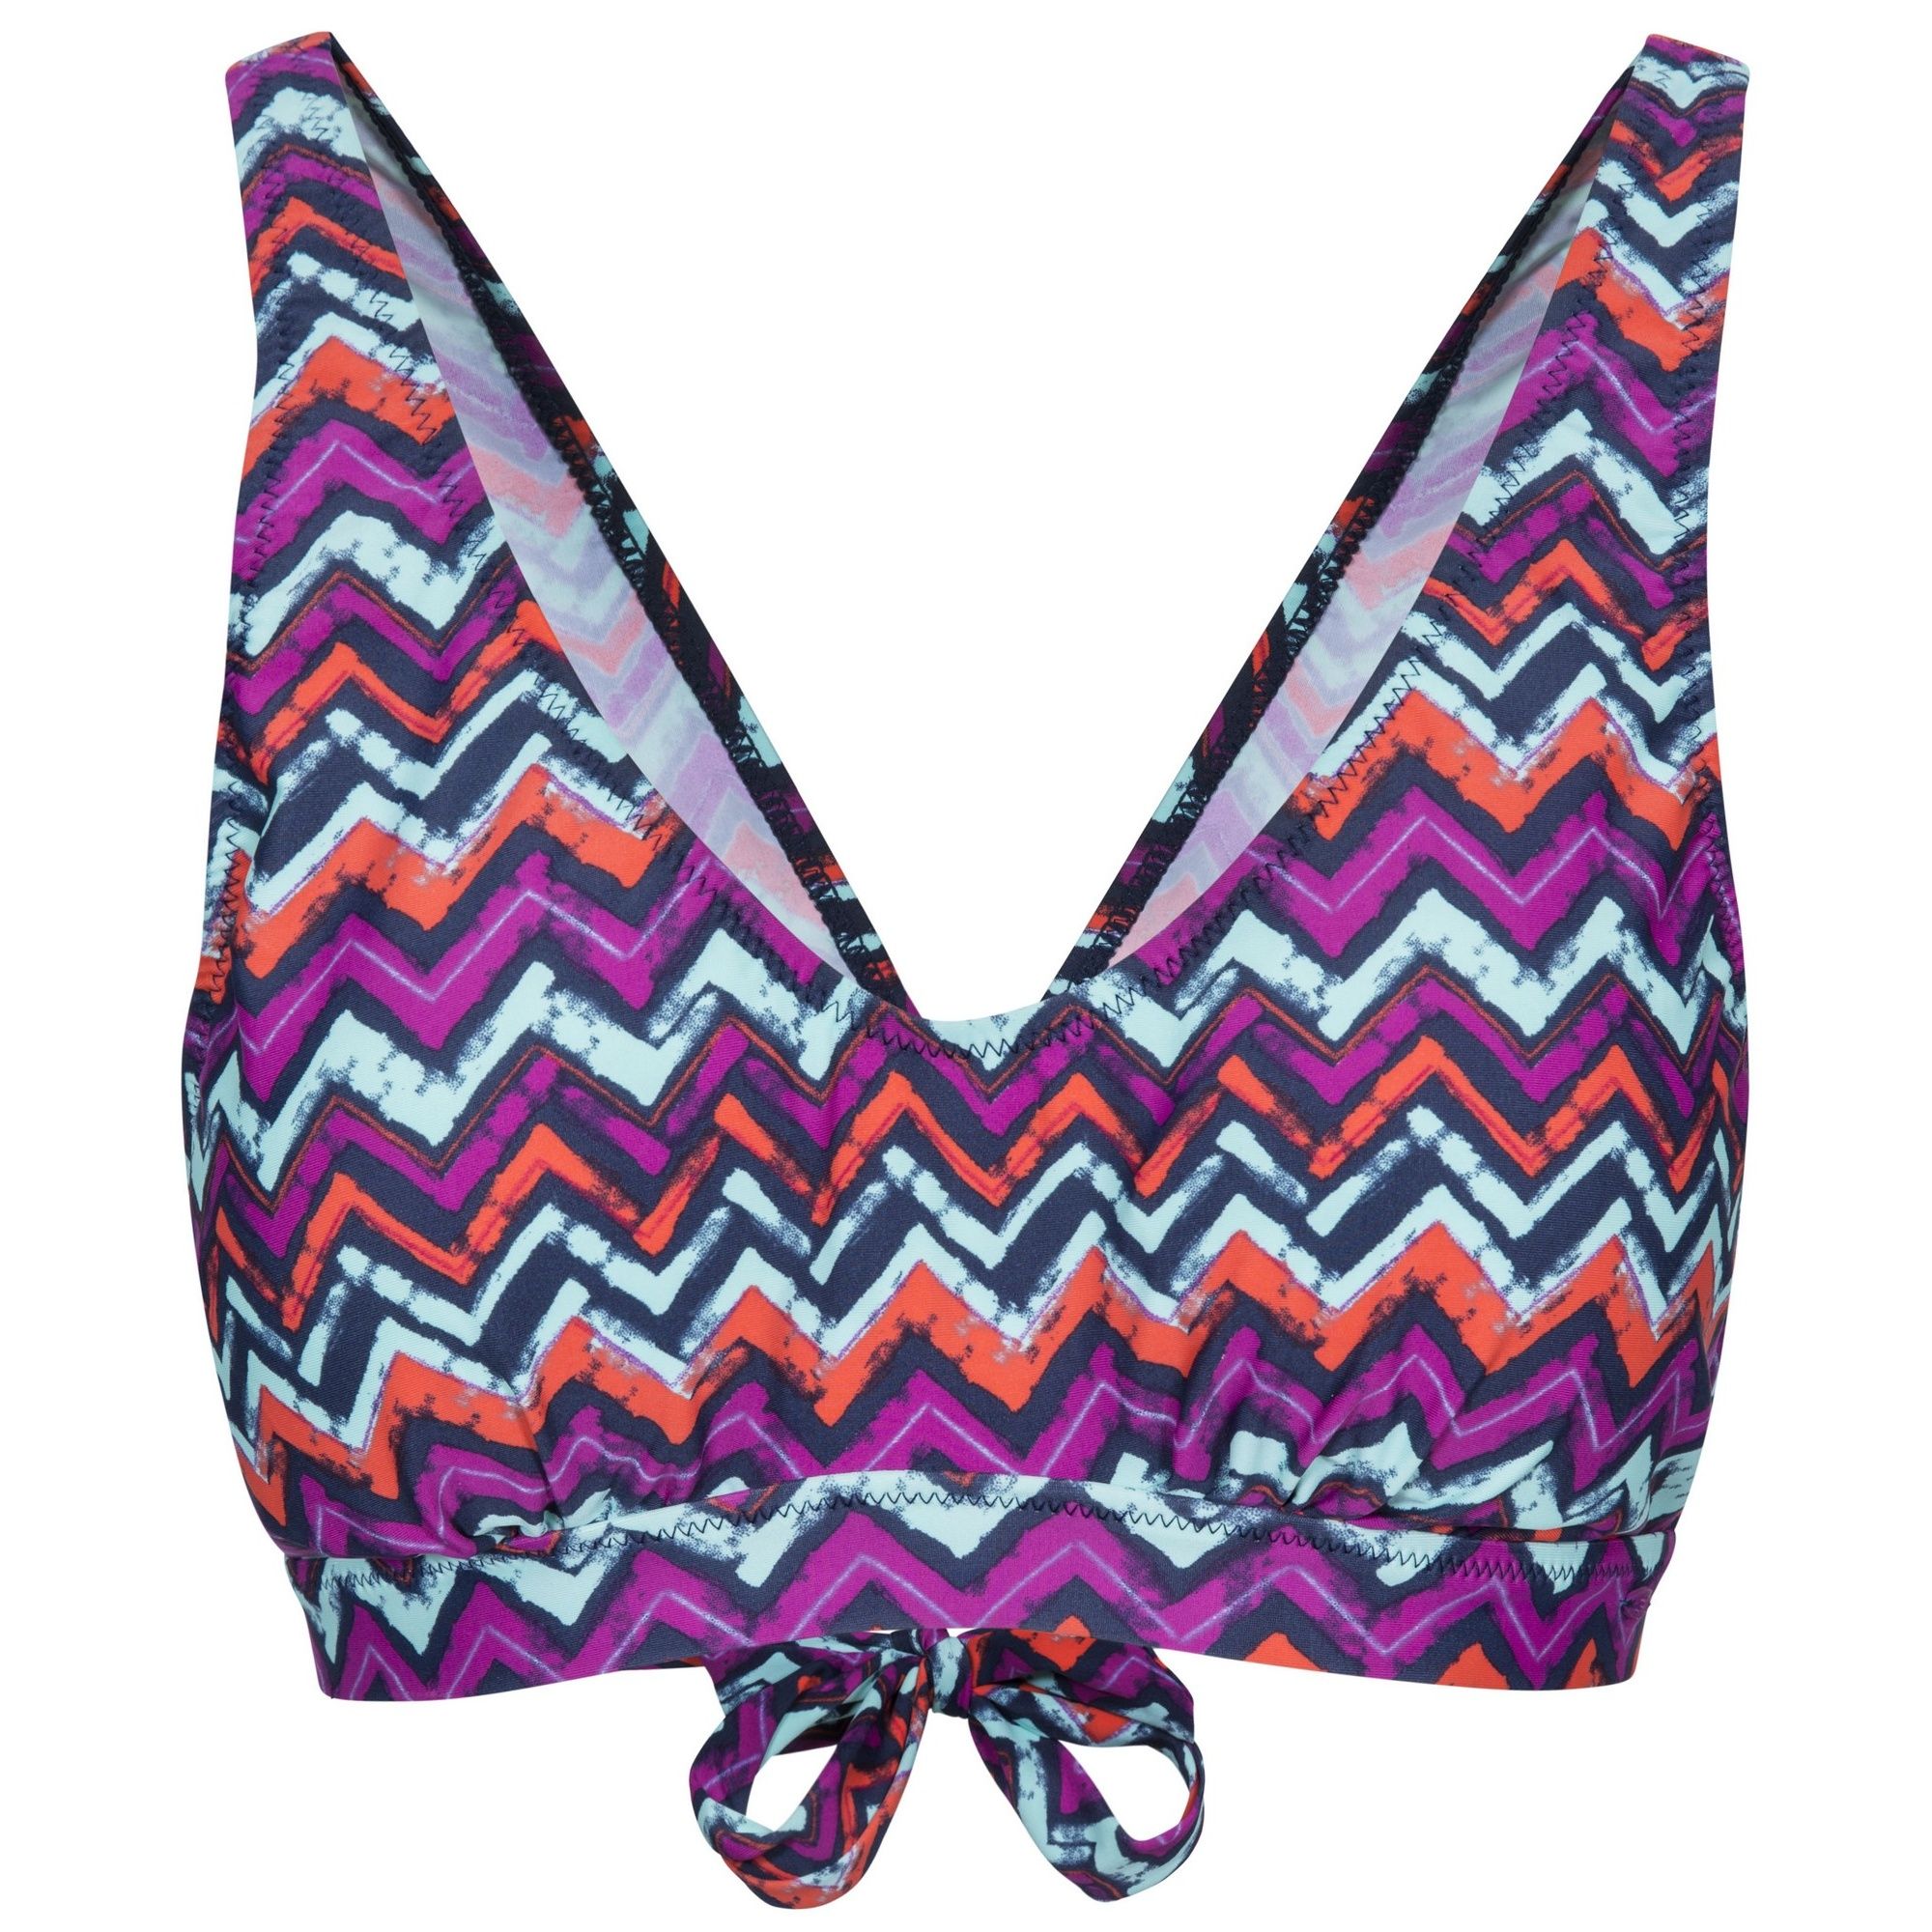 Bikini top. Tie back. All over print. Removable bust pads. 80% Polyamide, 20% Elastane. Trespass Womens Chest Sizing (approx): XS/8 - 32in/81cm, S/10 - 34in/86cm, M/12 - 36in/91.4cm, L/14 - 38in/96.5cm, XL/16 - 40in/101.5cm, XXL/18 - 42in/106.5cm.